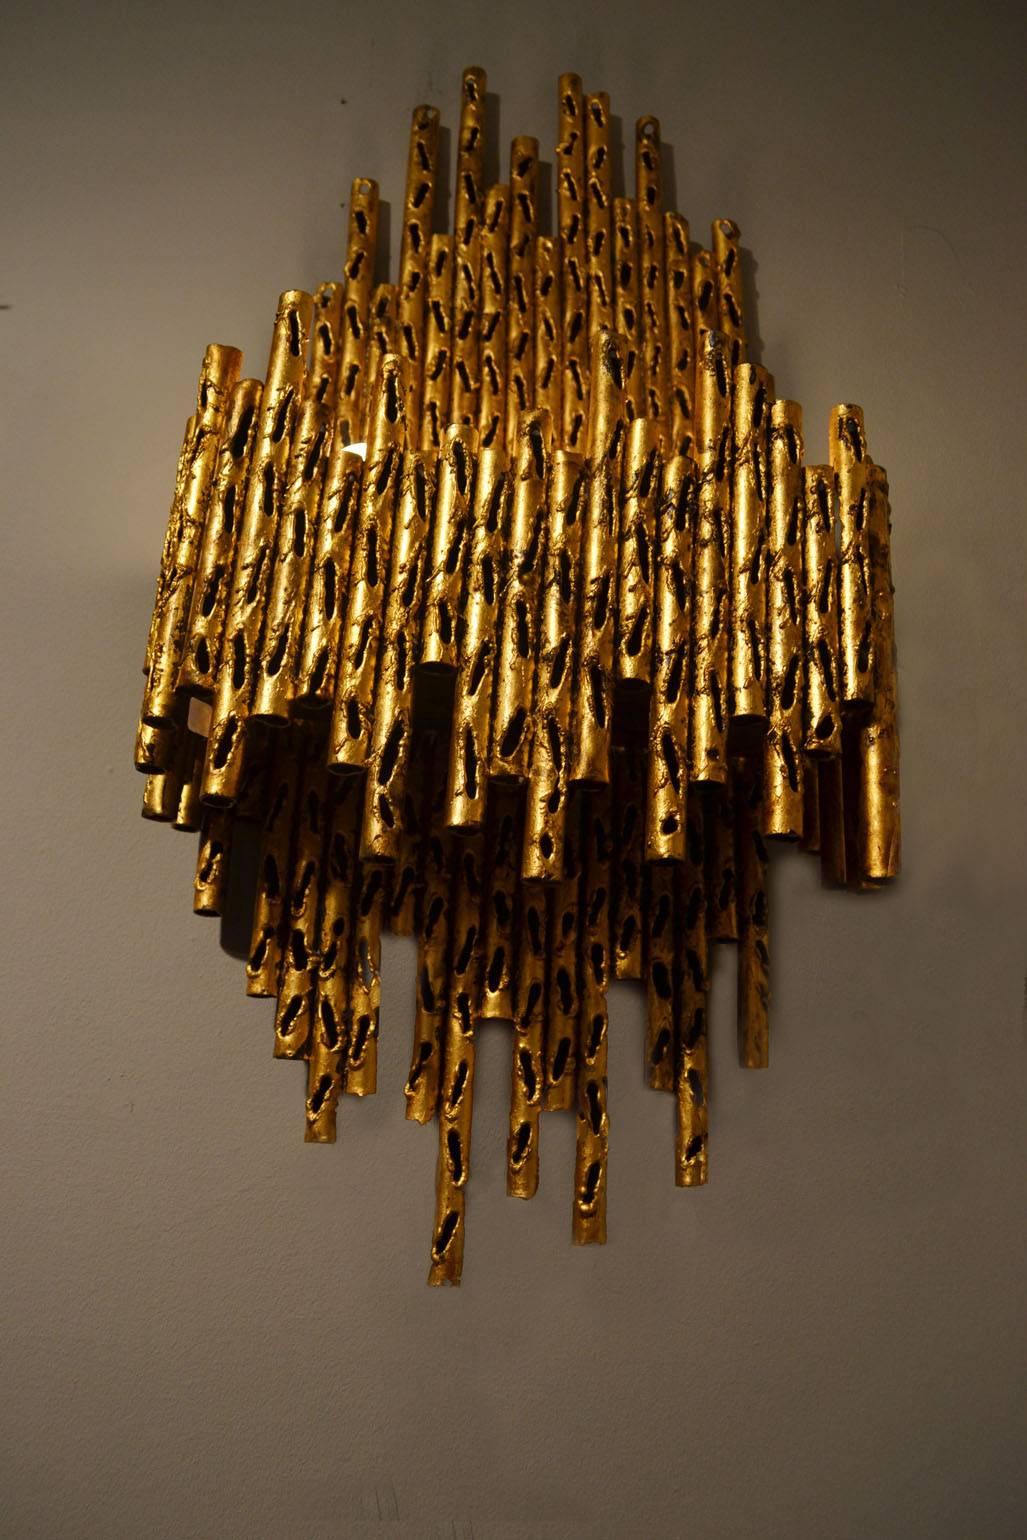 Expressive Brutalist wall lamps designed by Marcello Fantoni in gilded metal.
They have been gilded possibly at a later date.